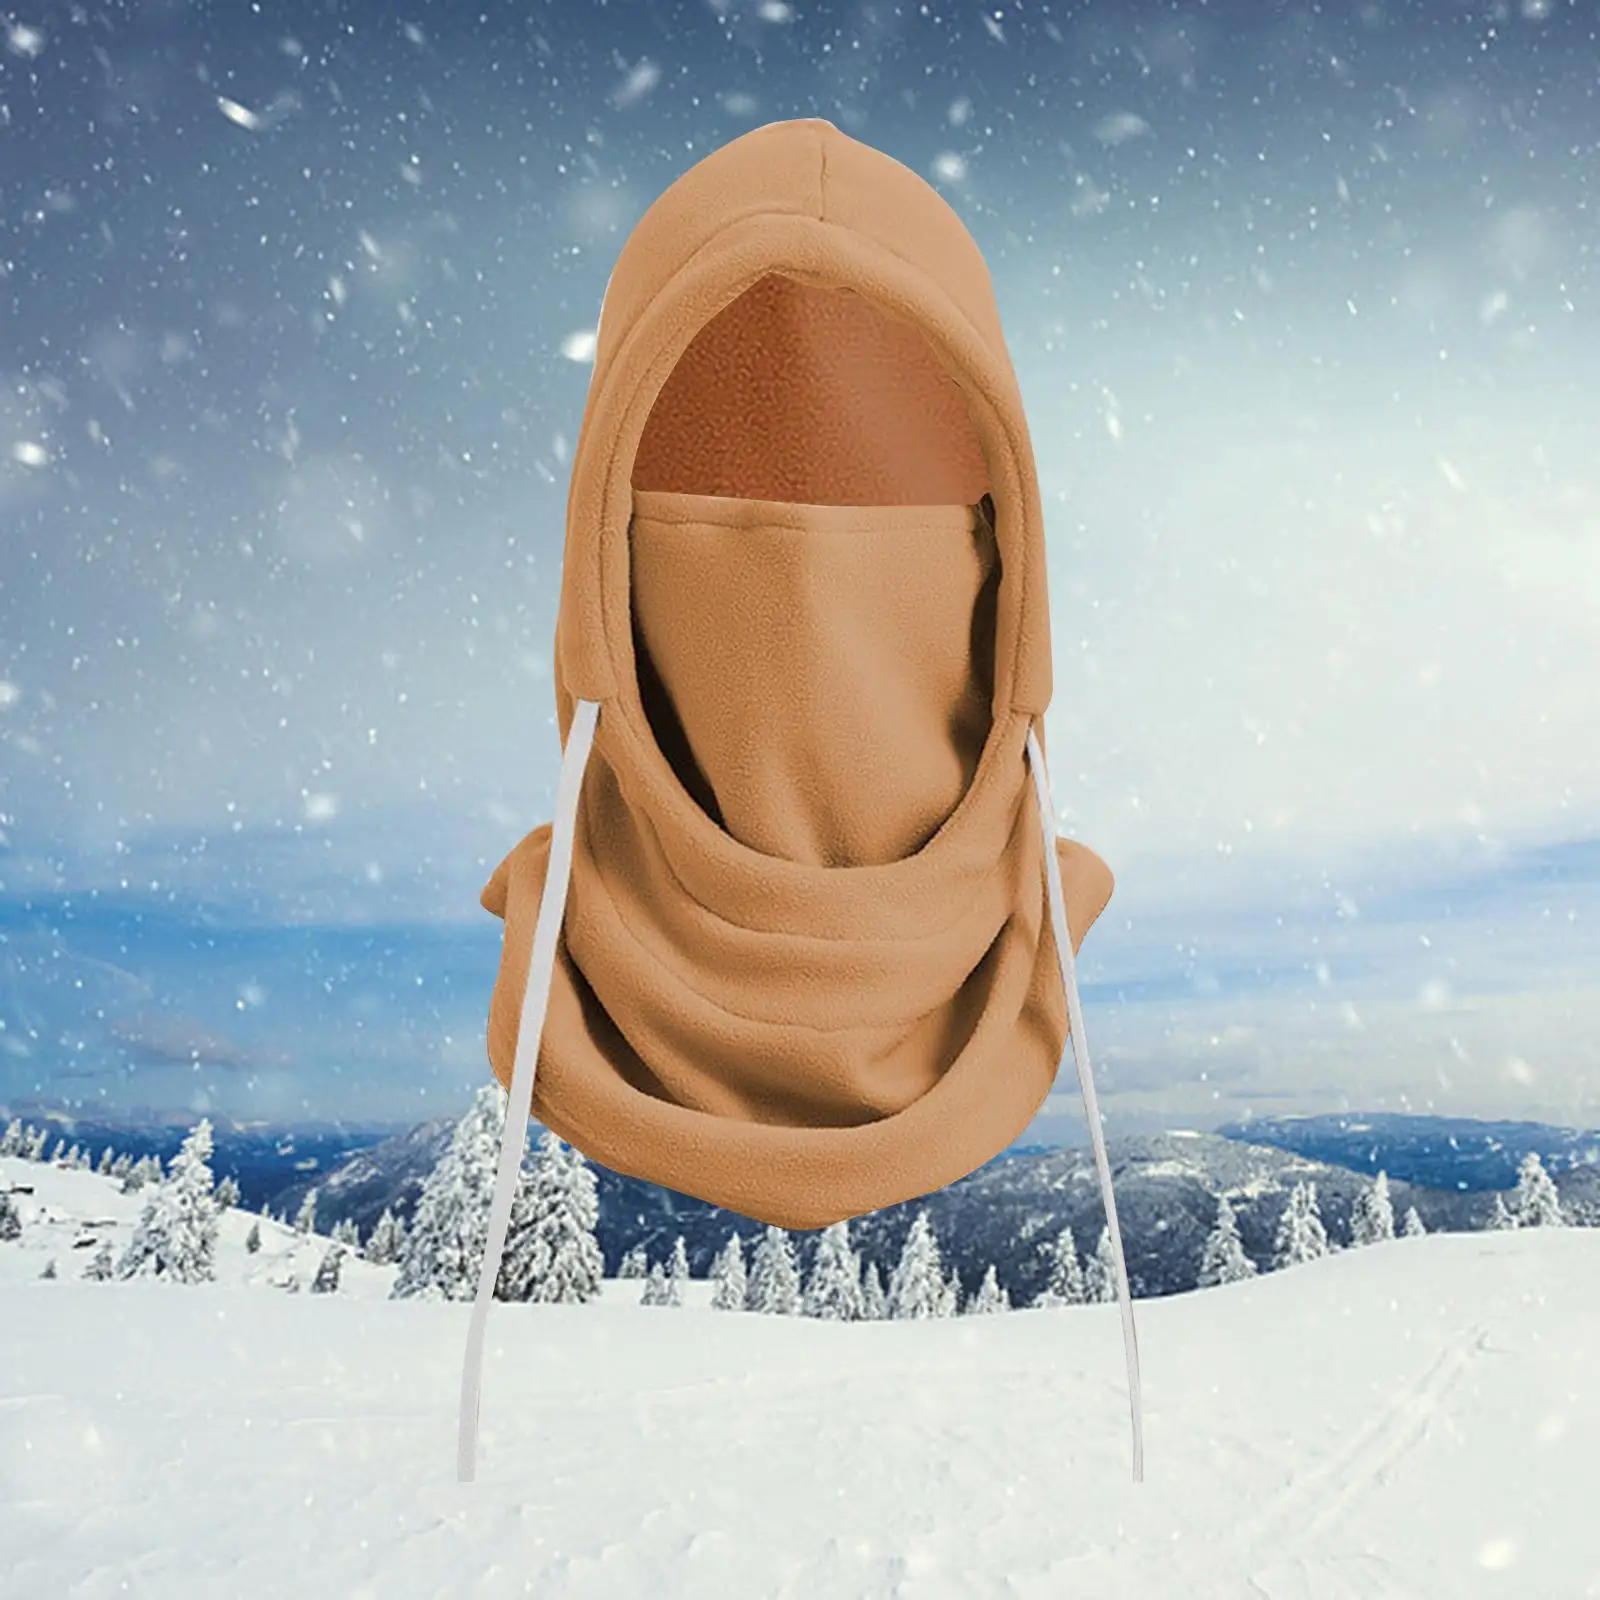 Balaclava  Neck Warmer for Outdoor Ski Sport with Elastic Cord Comfortable Durable Multiple wearing Ways